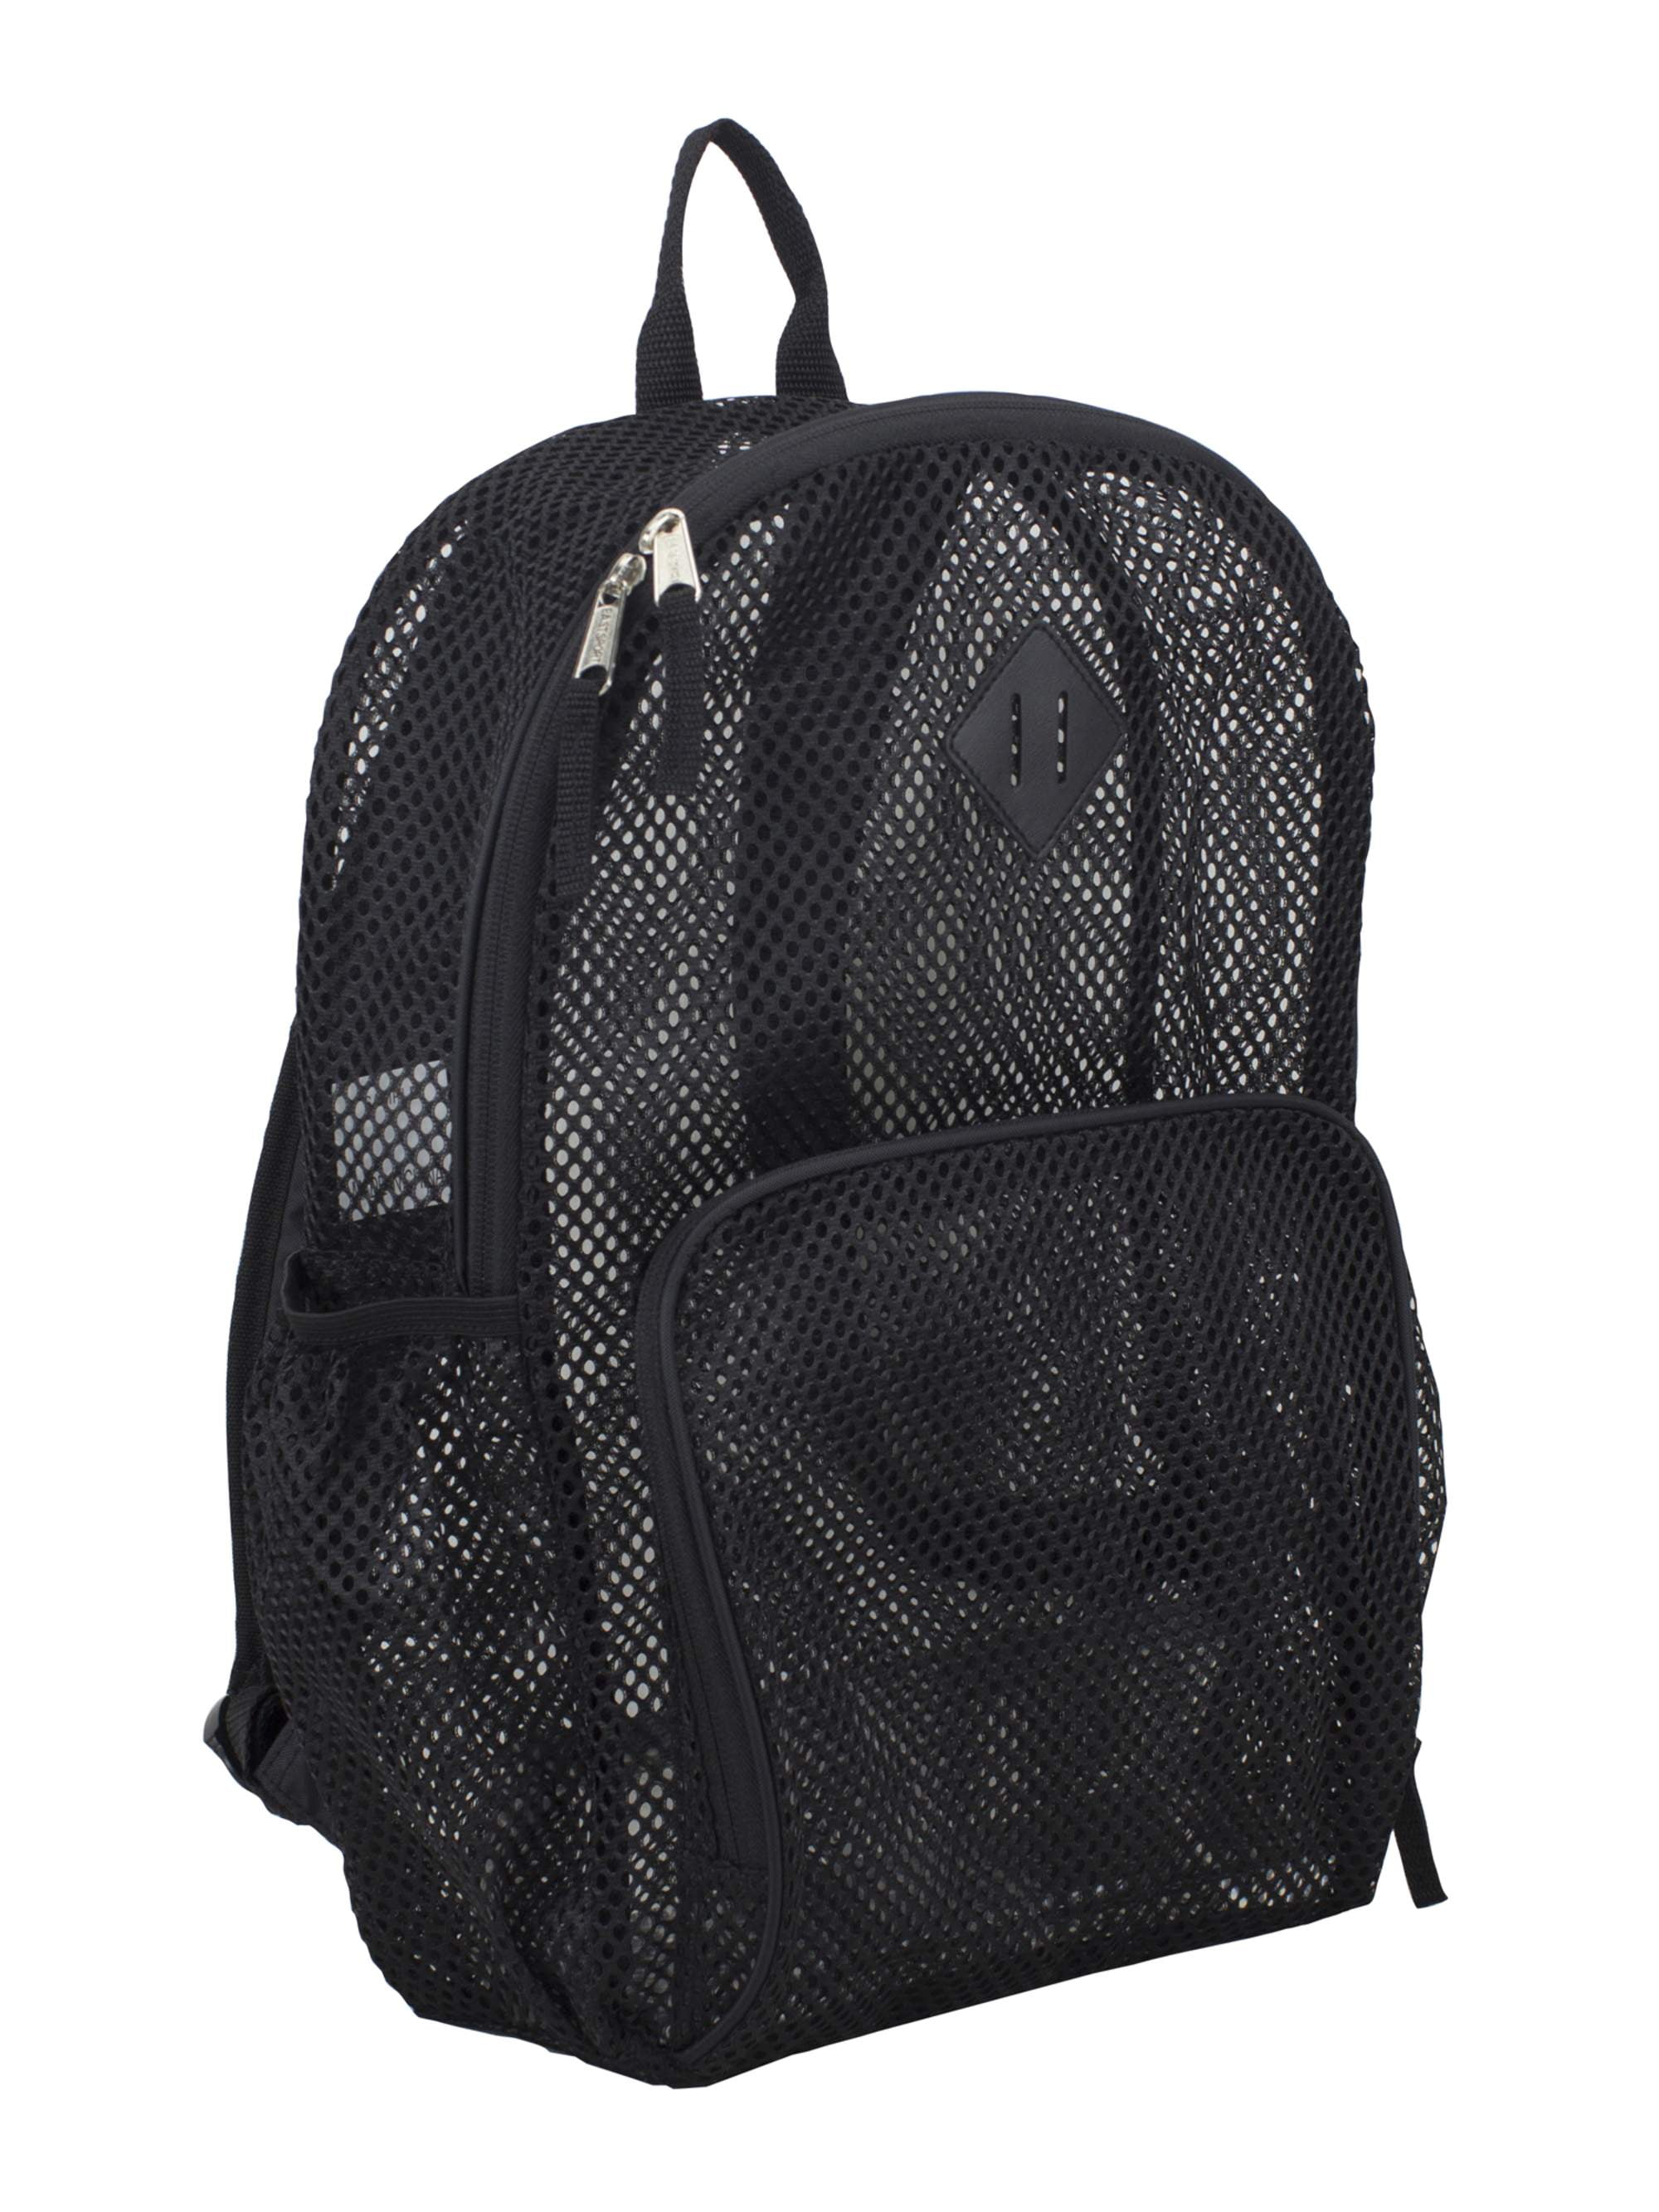 mesh book bags for boys